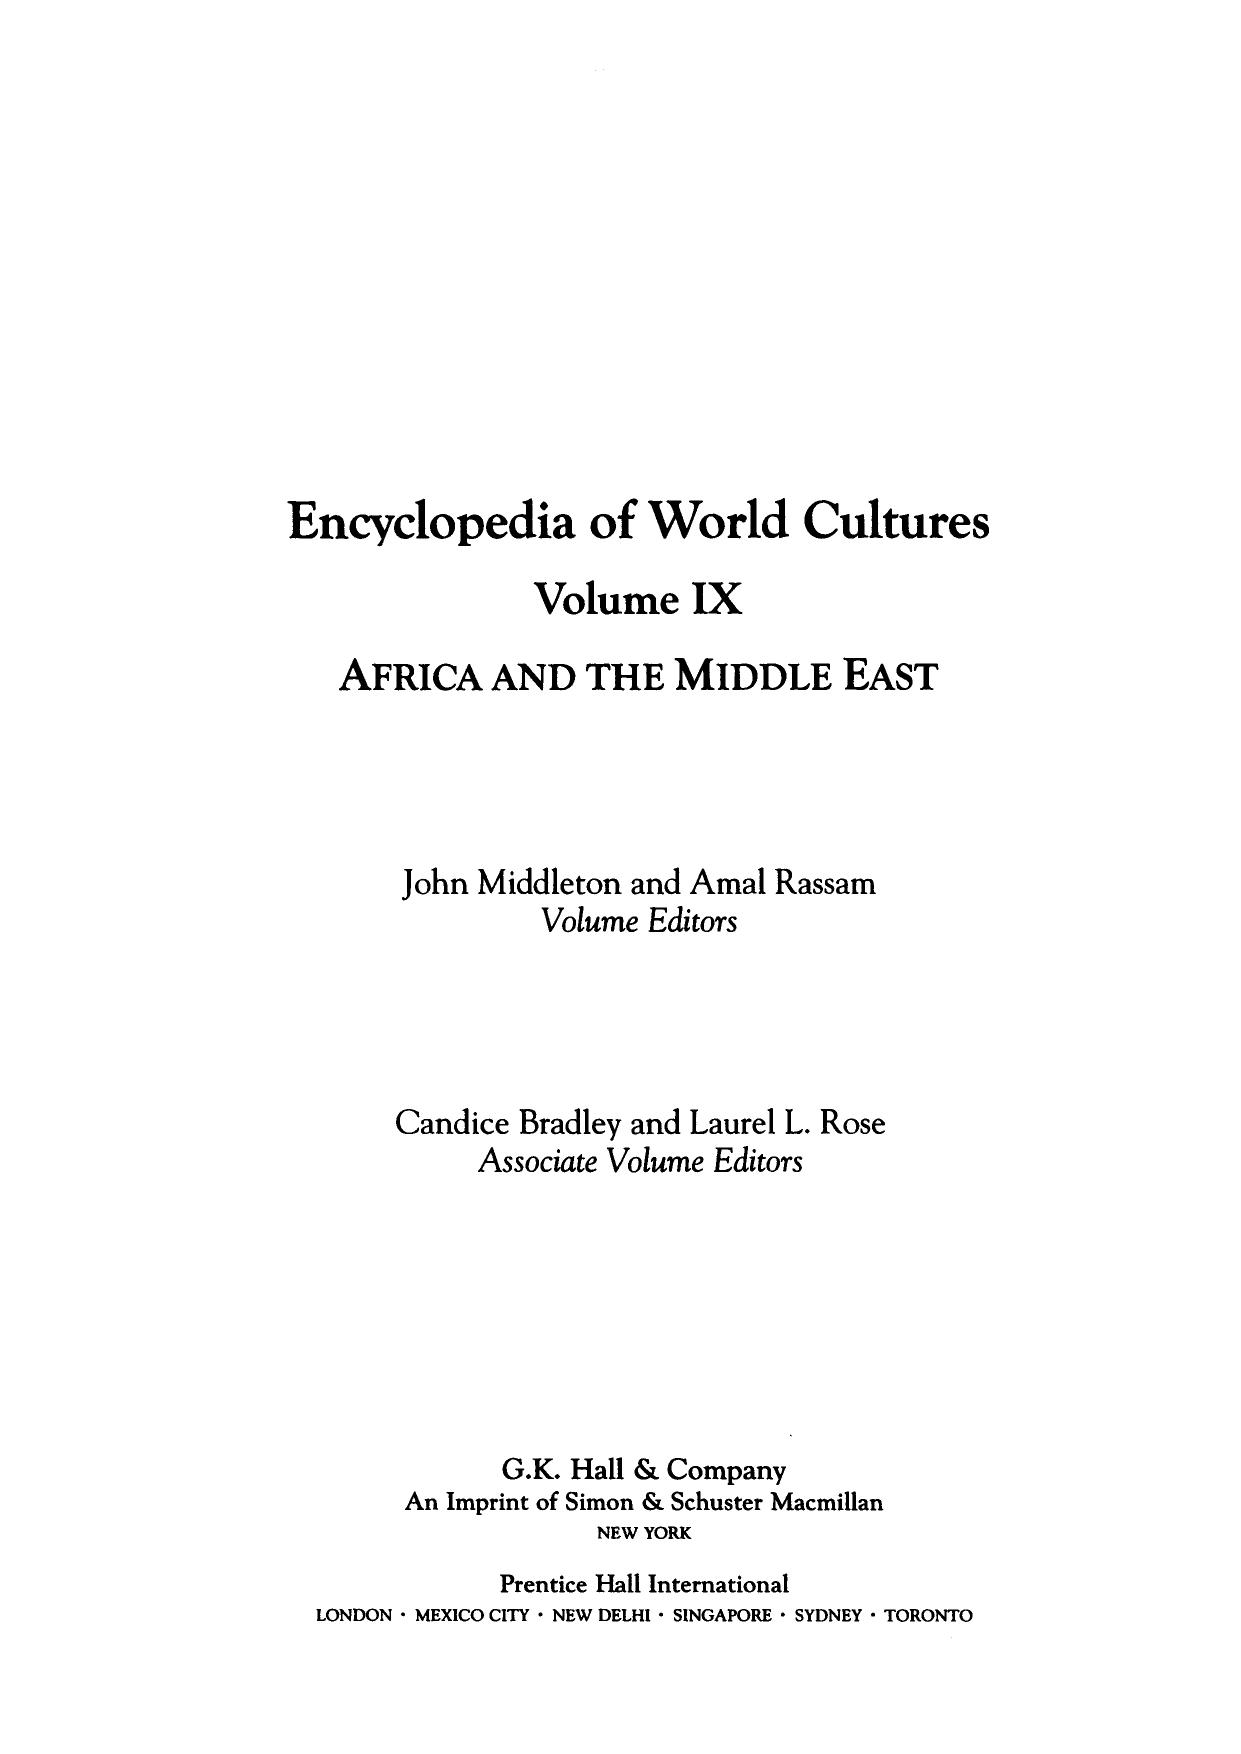 Encyclopedia of World Cultures (Encyclopedia of World Cultures Series) Africa and the Middle East